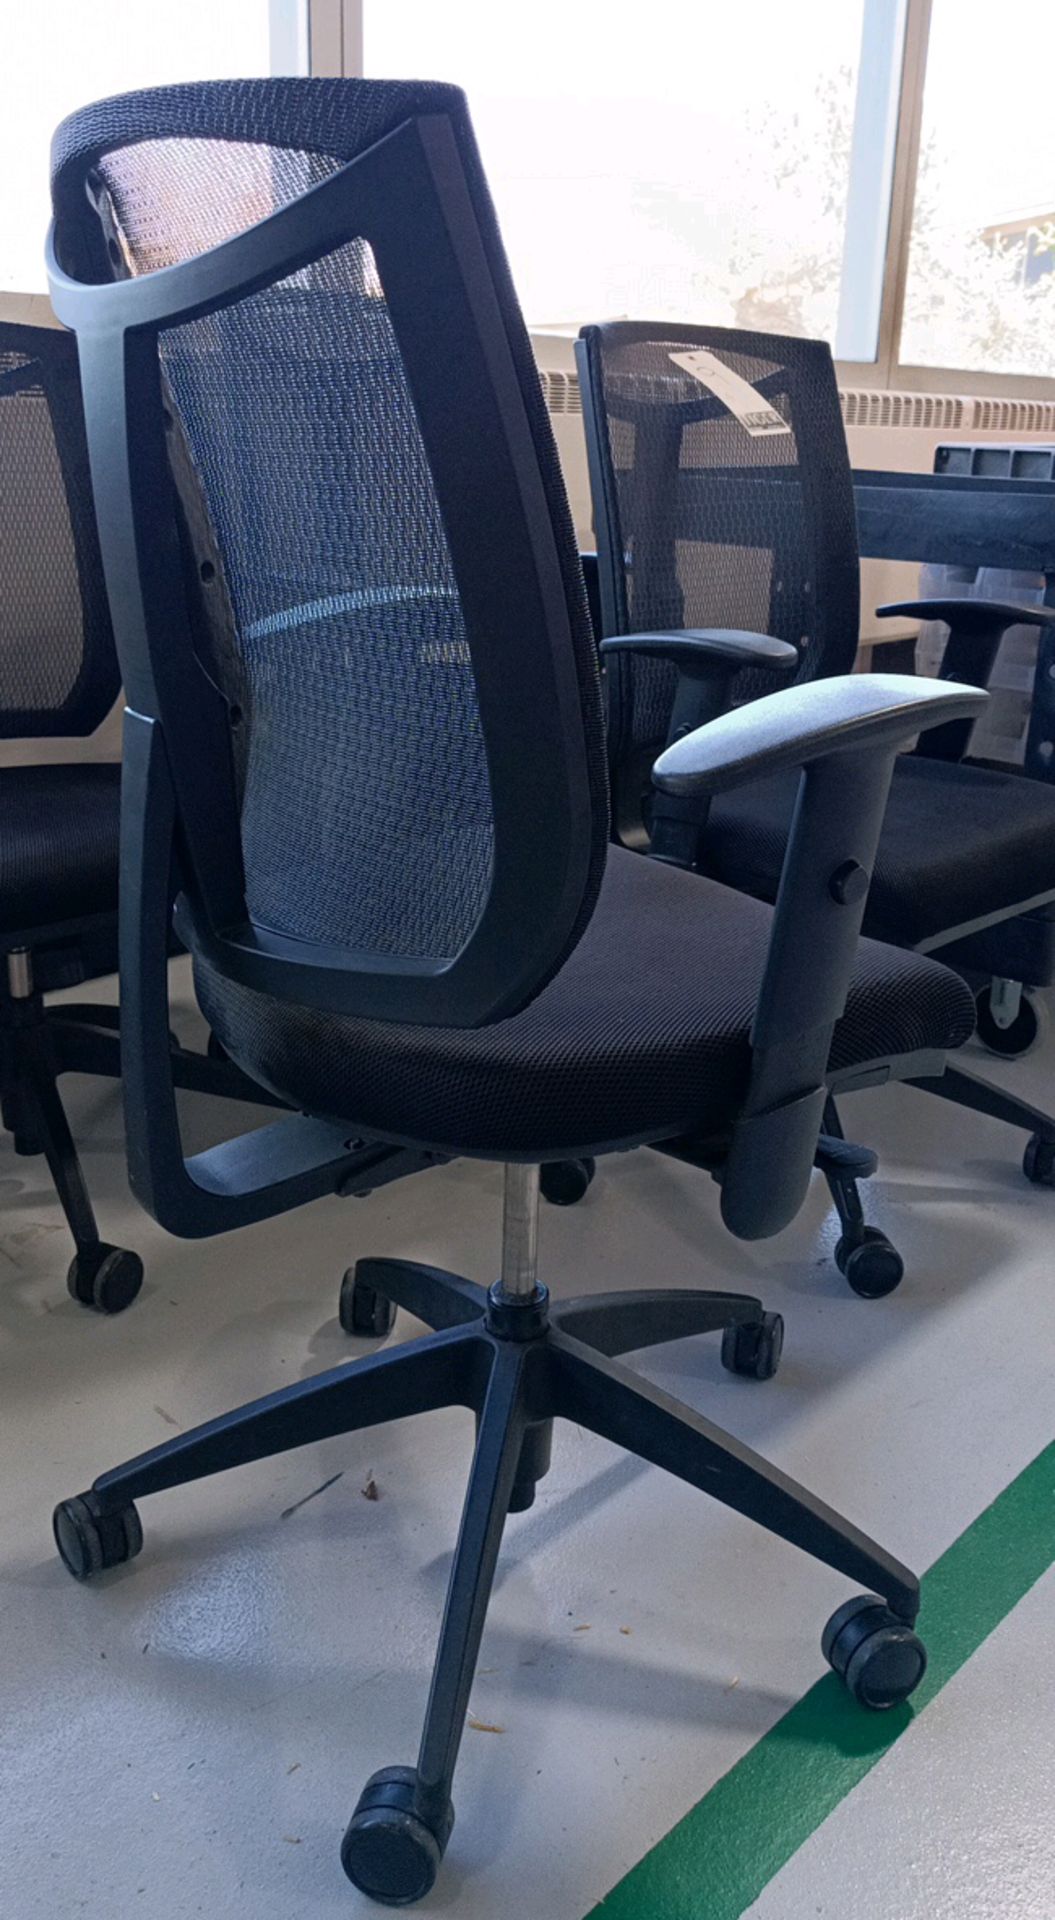 Mesh Mid-Back Office Chairs - Image 3 of 3